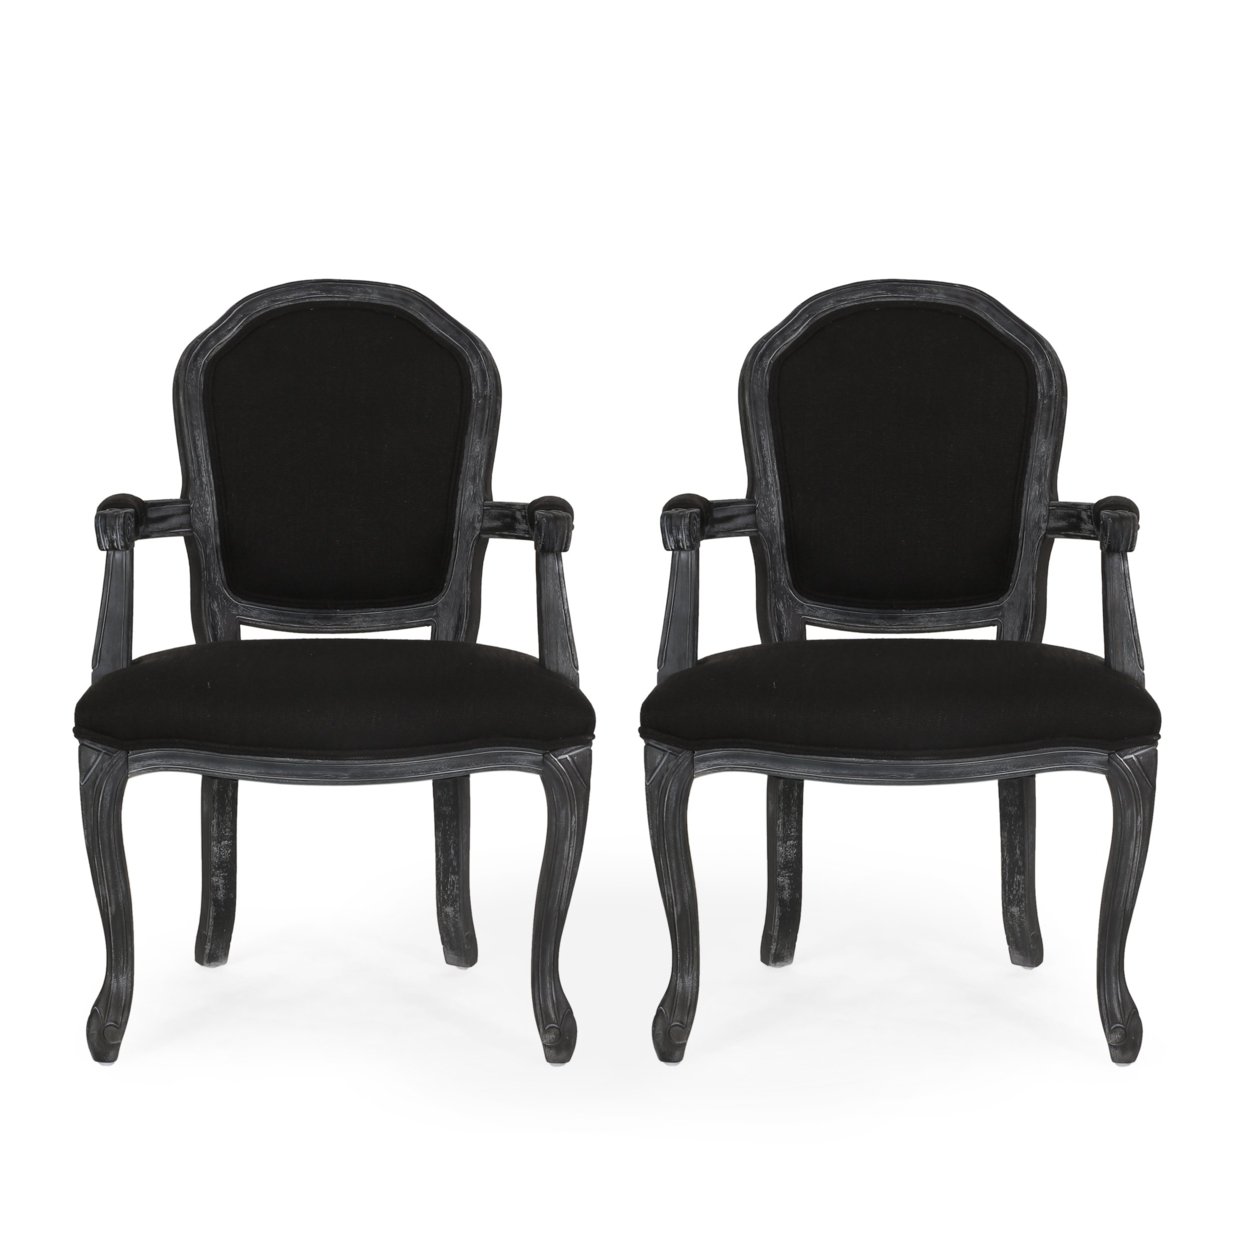 Fairgreens Traditional Upholstered Dining Chairs, Set Of 2 - Black